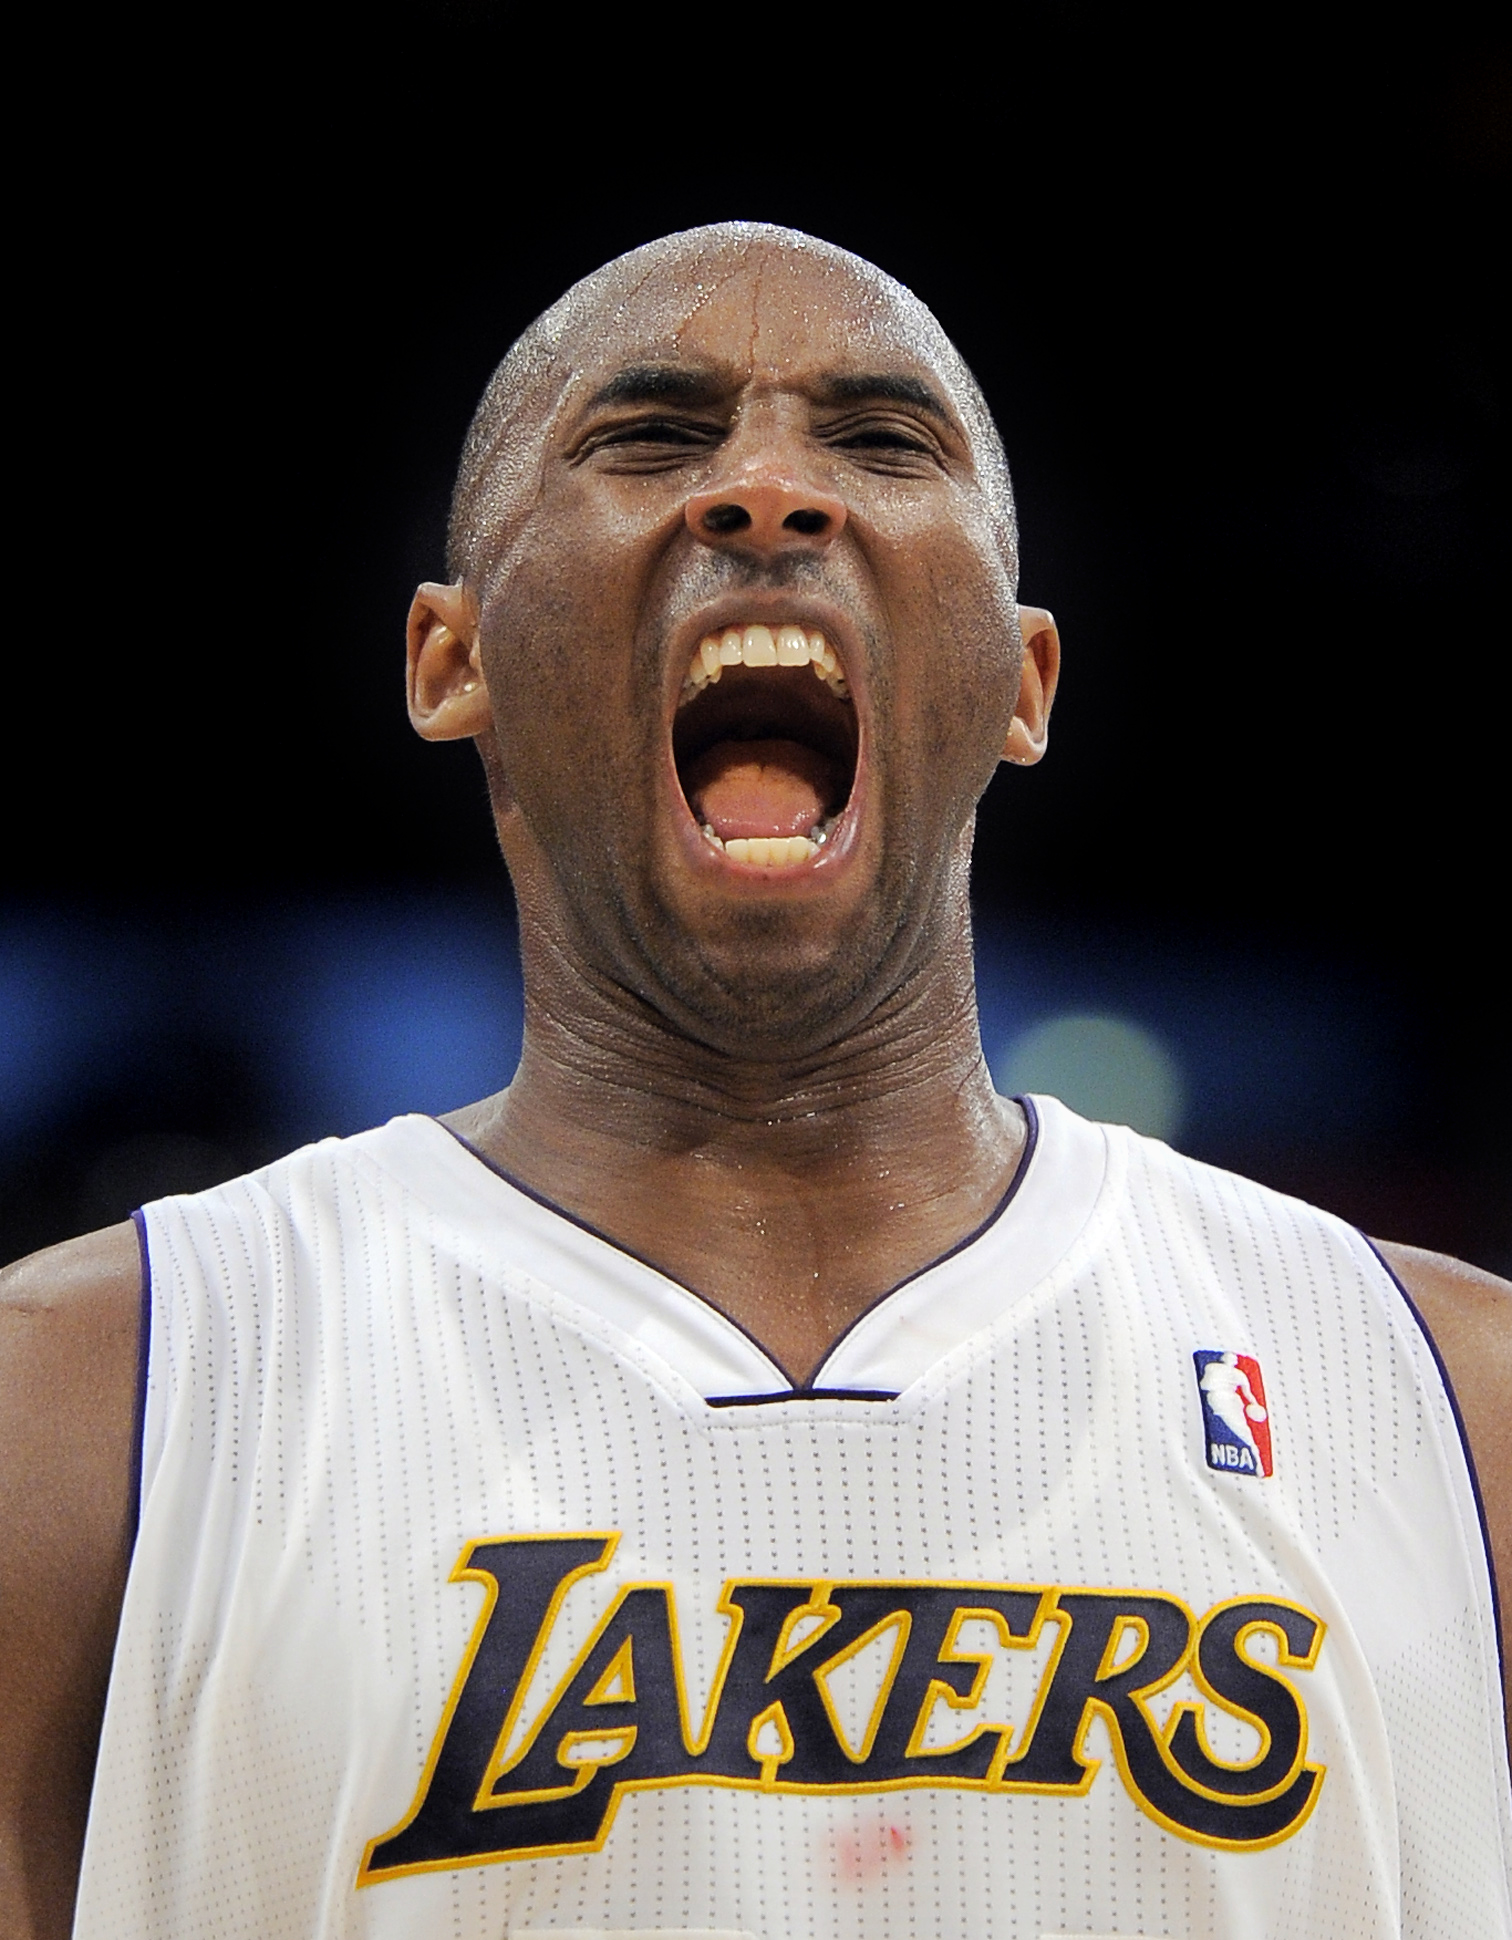 Los Angeles Lakers guard Kobe Bryant reacts in the closing seconds of their NBA basketball game against the Oklahoma City Thunder on April 22, 2012, in Los Angeles. The Lakers won 114-106.